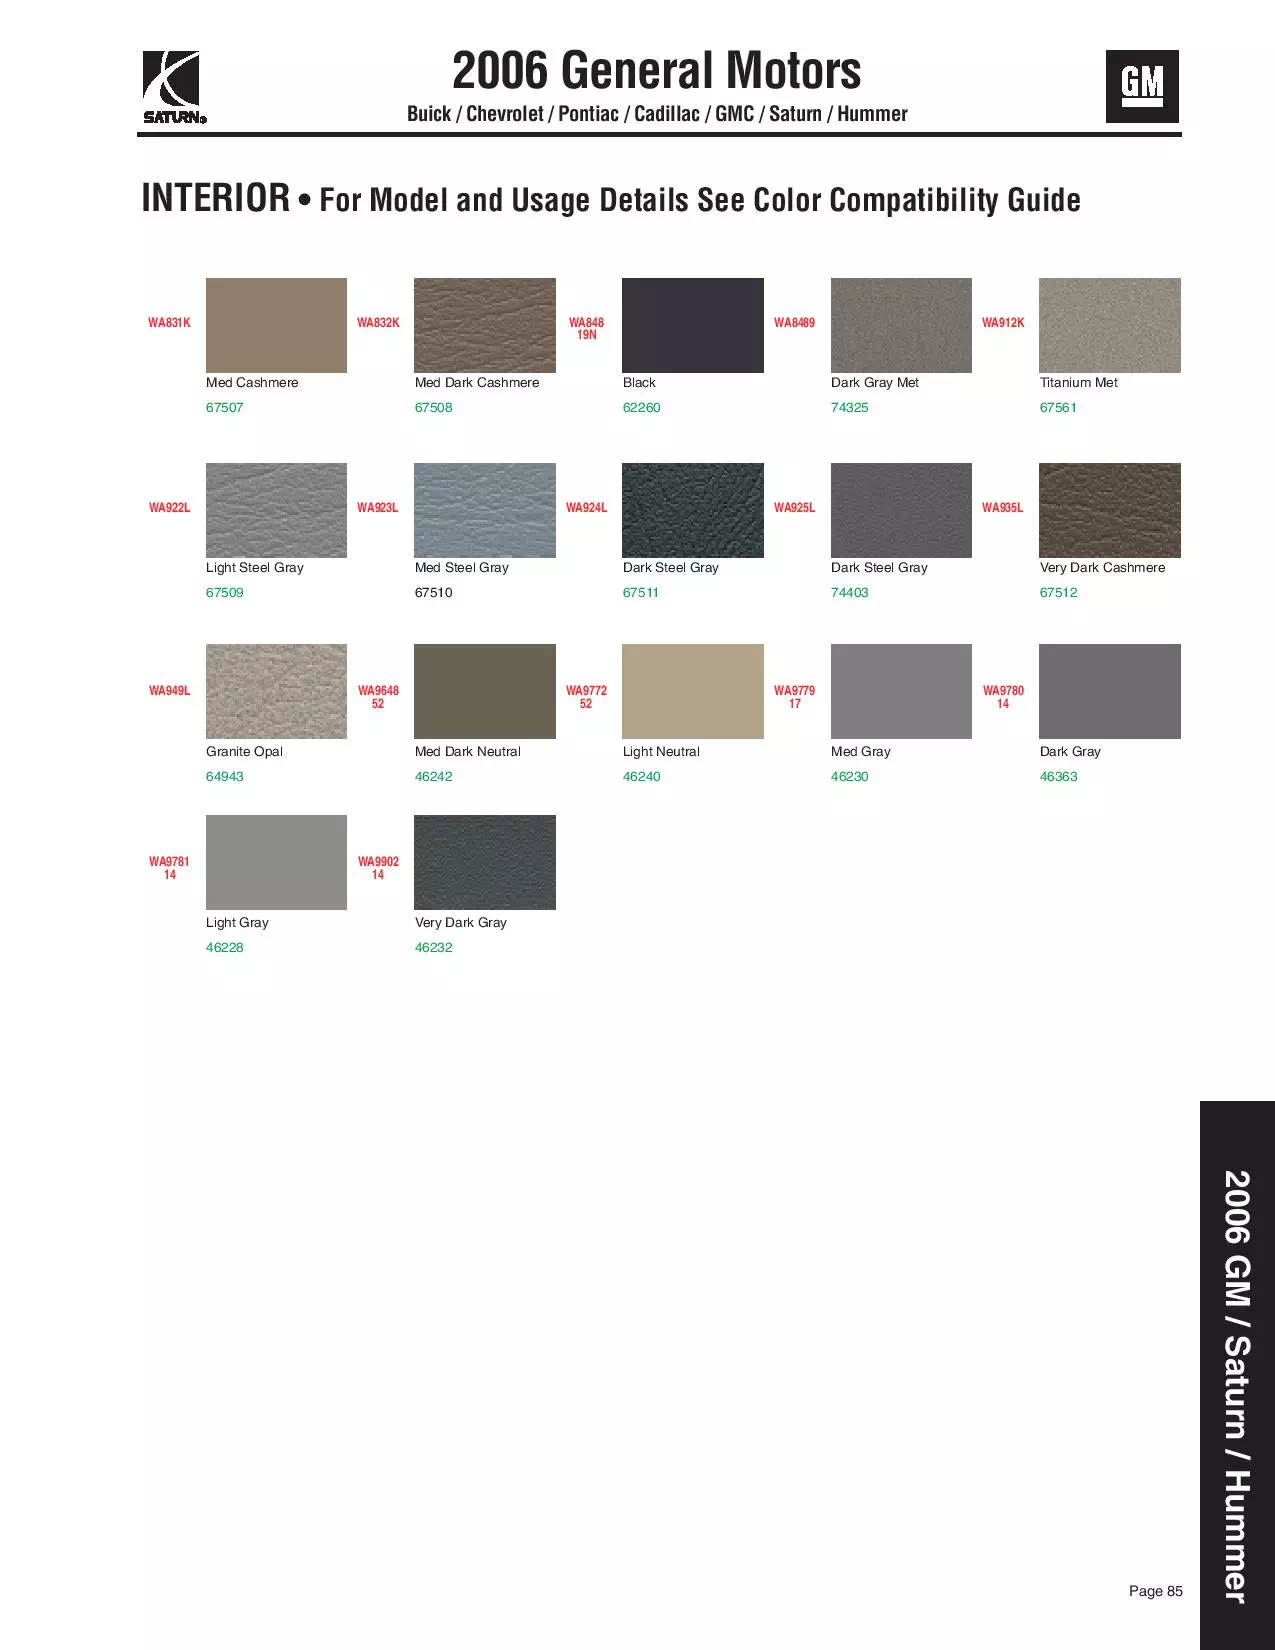 Paint Codes and colors for Buick, Cadillac, Chevy, GMC, Pontiac, and Saturn